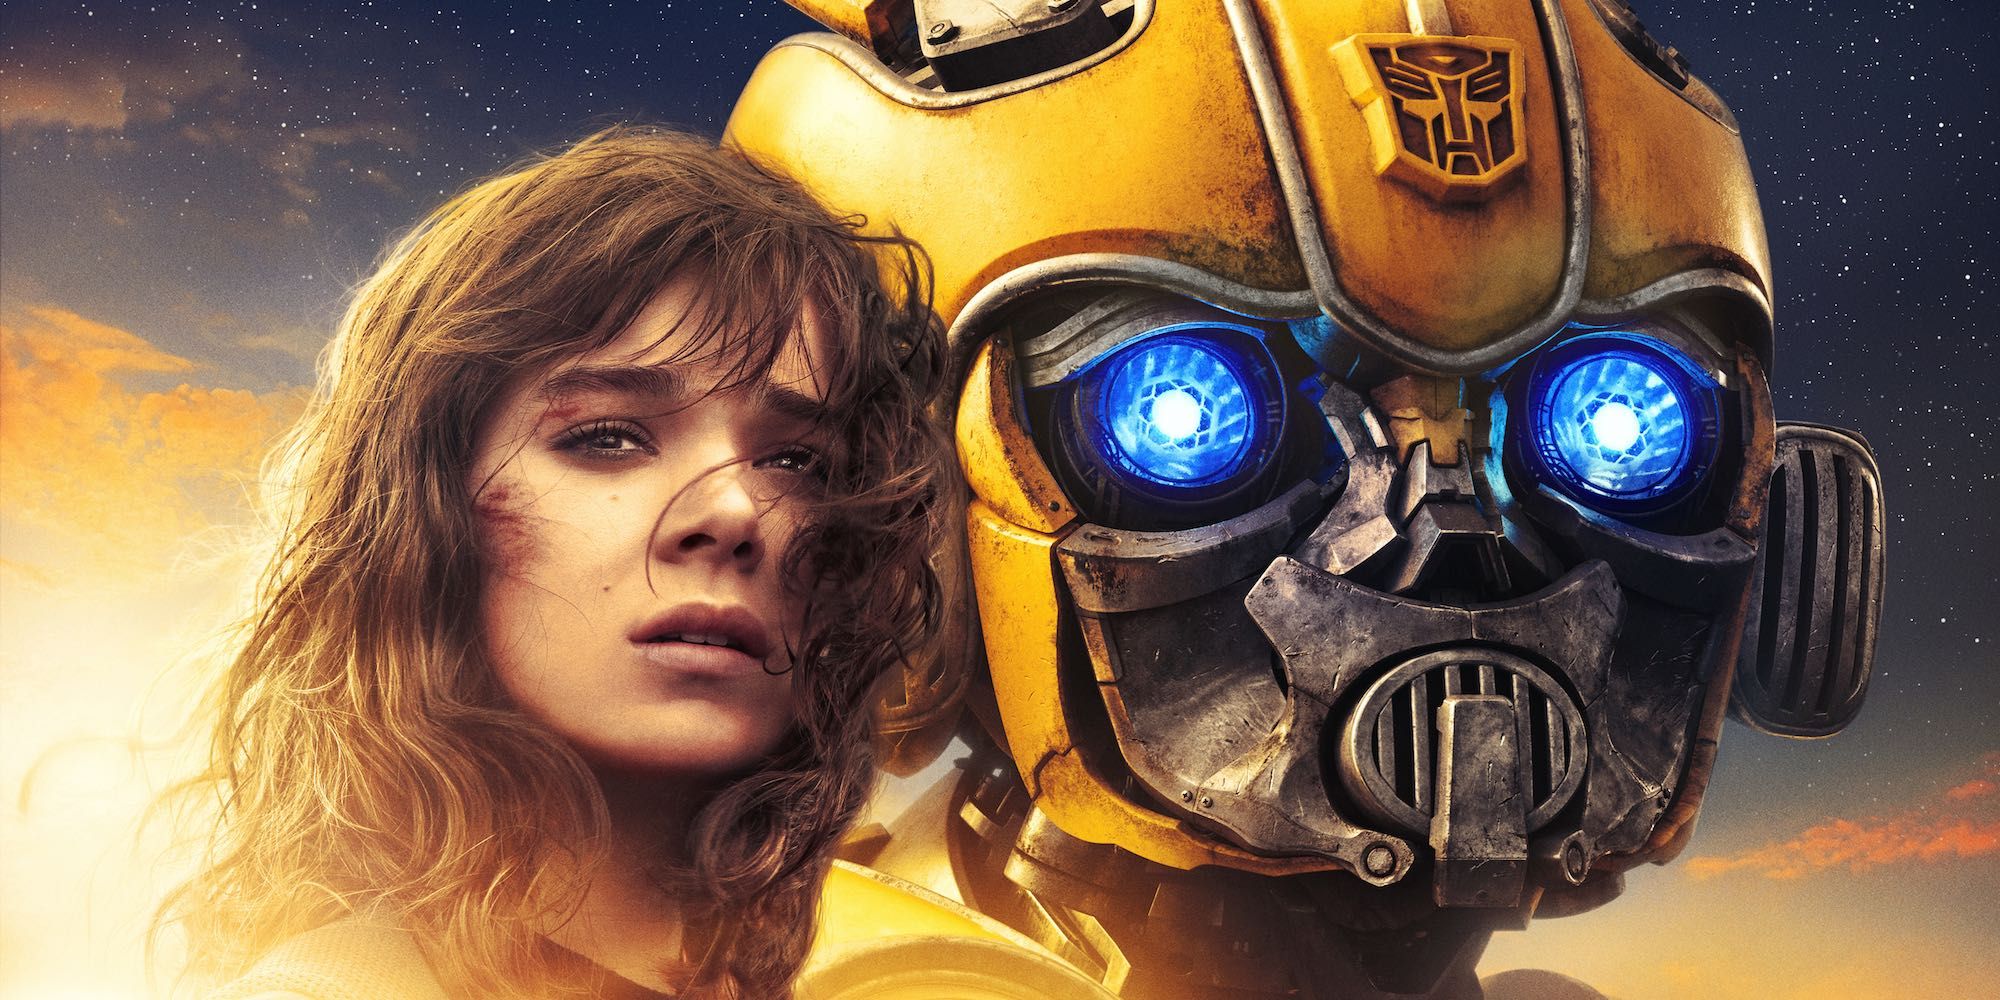 Bumblebee in his movie promo image.